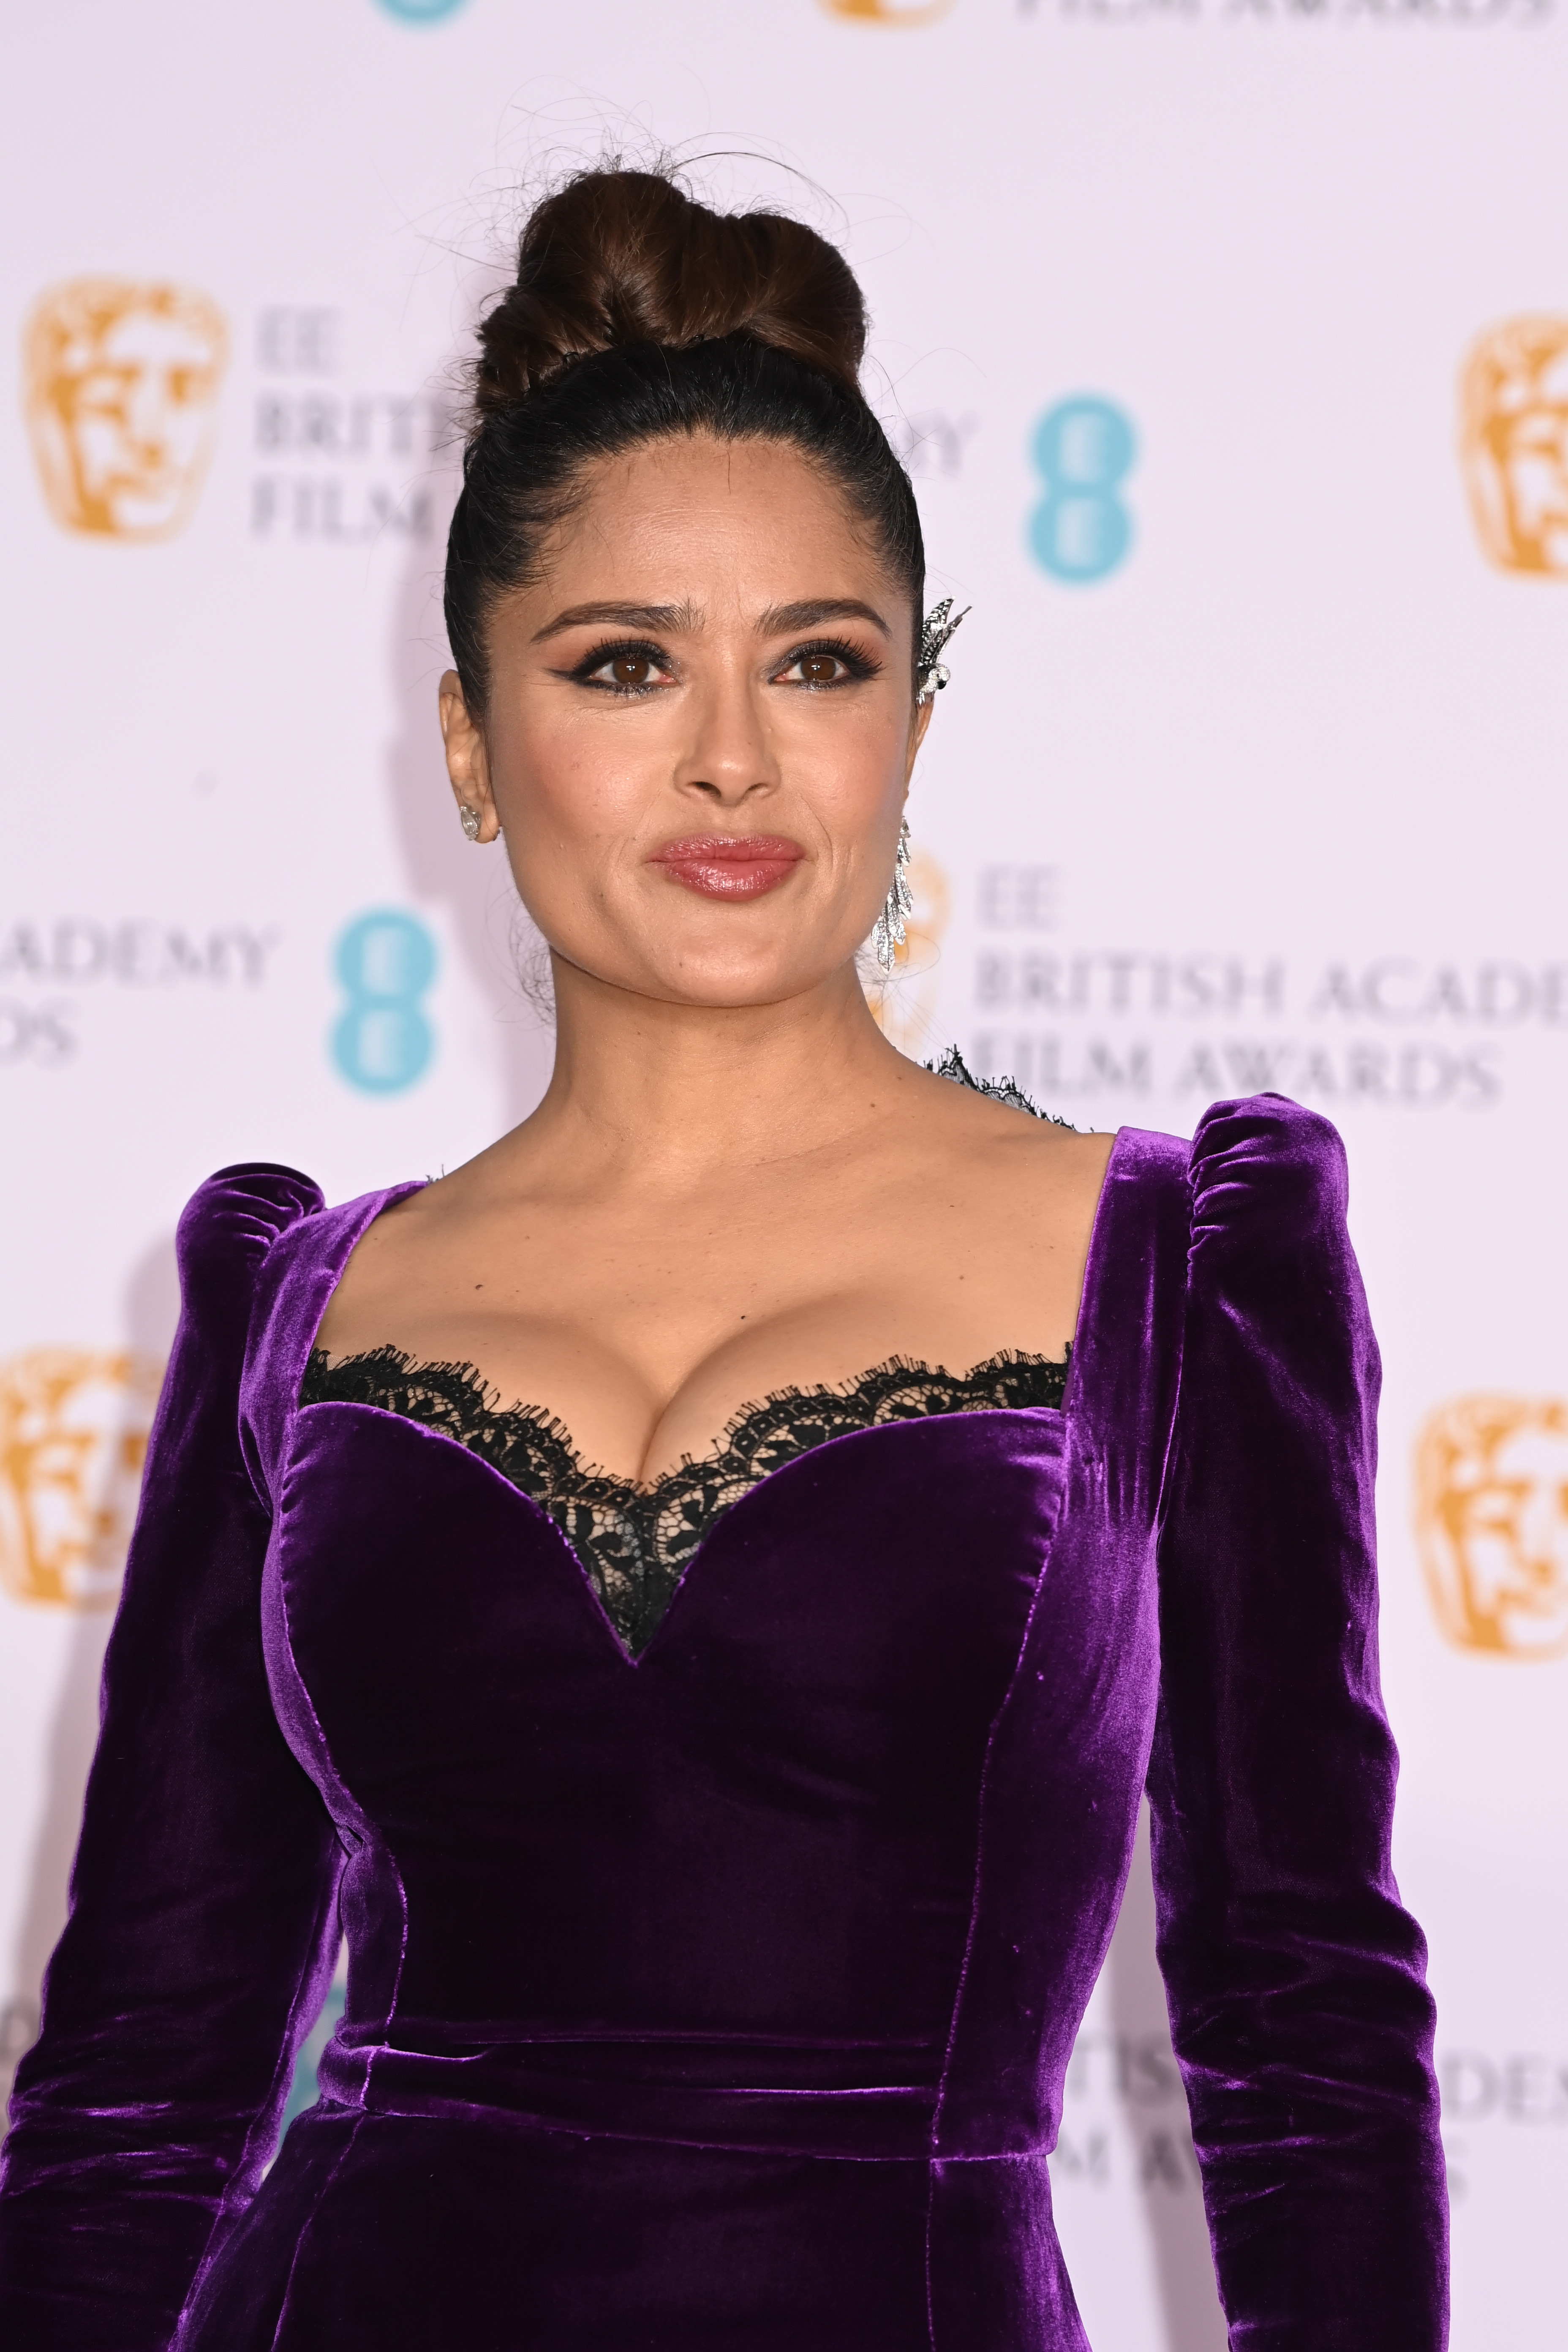 Salma Hayek on March 13, 2022 in London, England. | Source: Getty Images